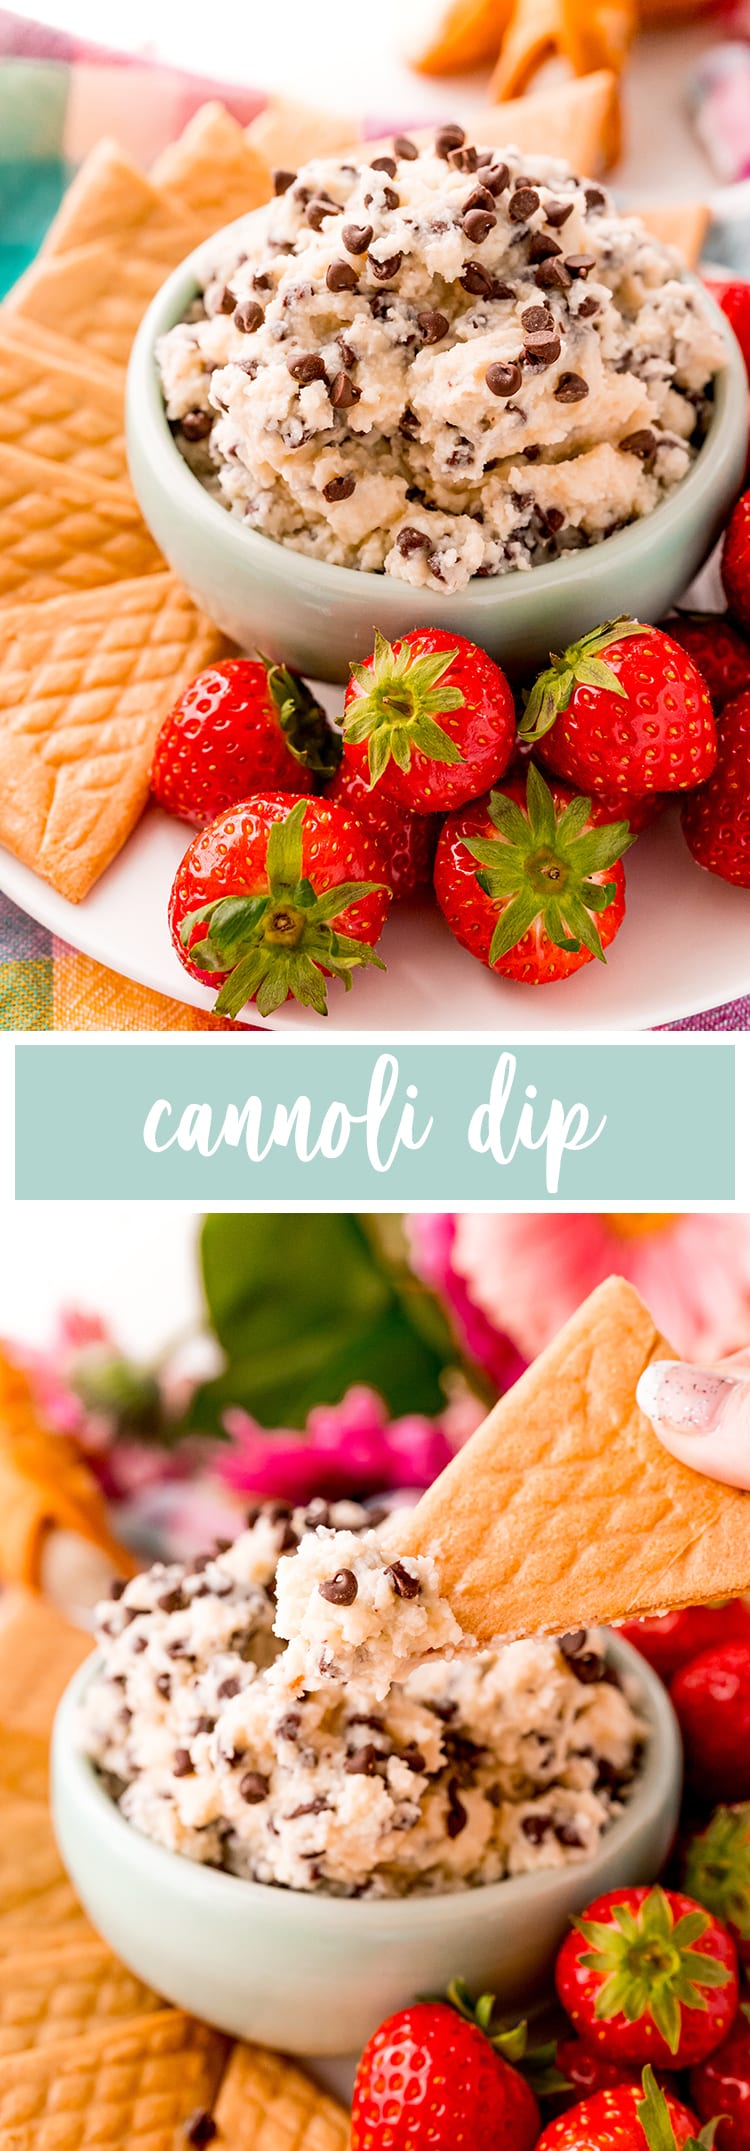 Cannoli dip is displayed with triangle crepe cookies dipping into a bowl and strawberries above.